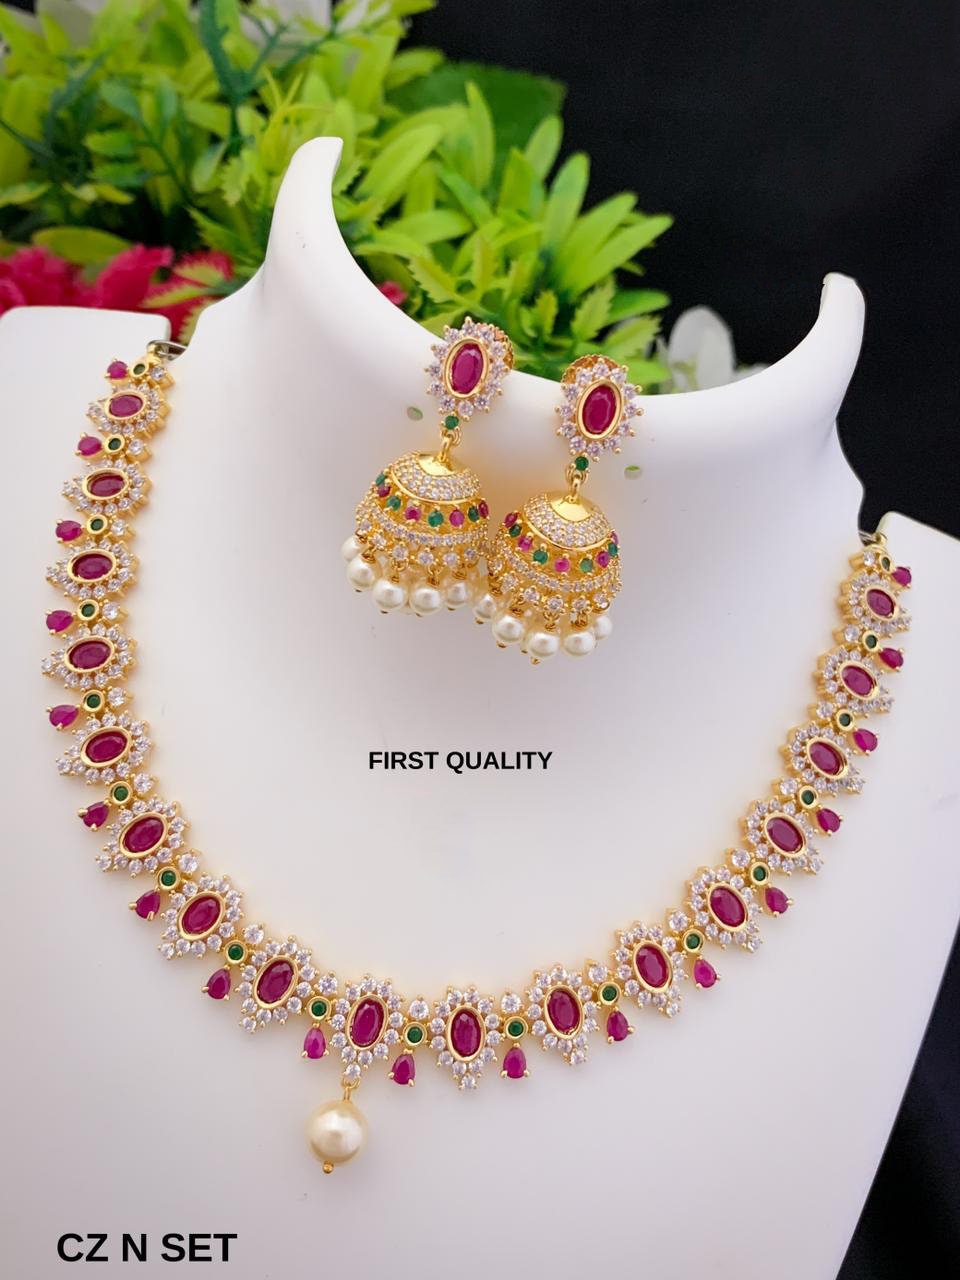 Exclusive South Indian style matte Gold necklace with Ruby Emerald stones  and Jhumka Earrings | Simple choker Indian Temple Jewelry necklace | Gift